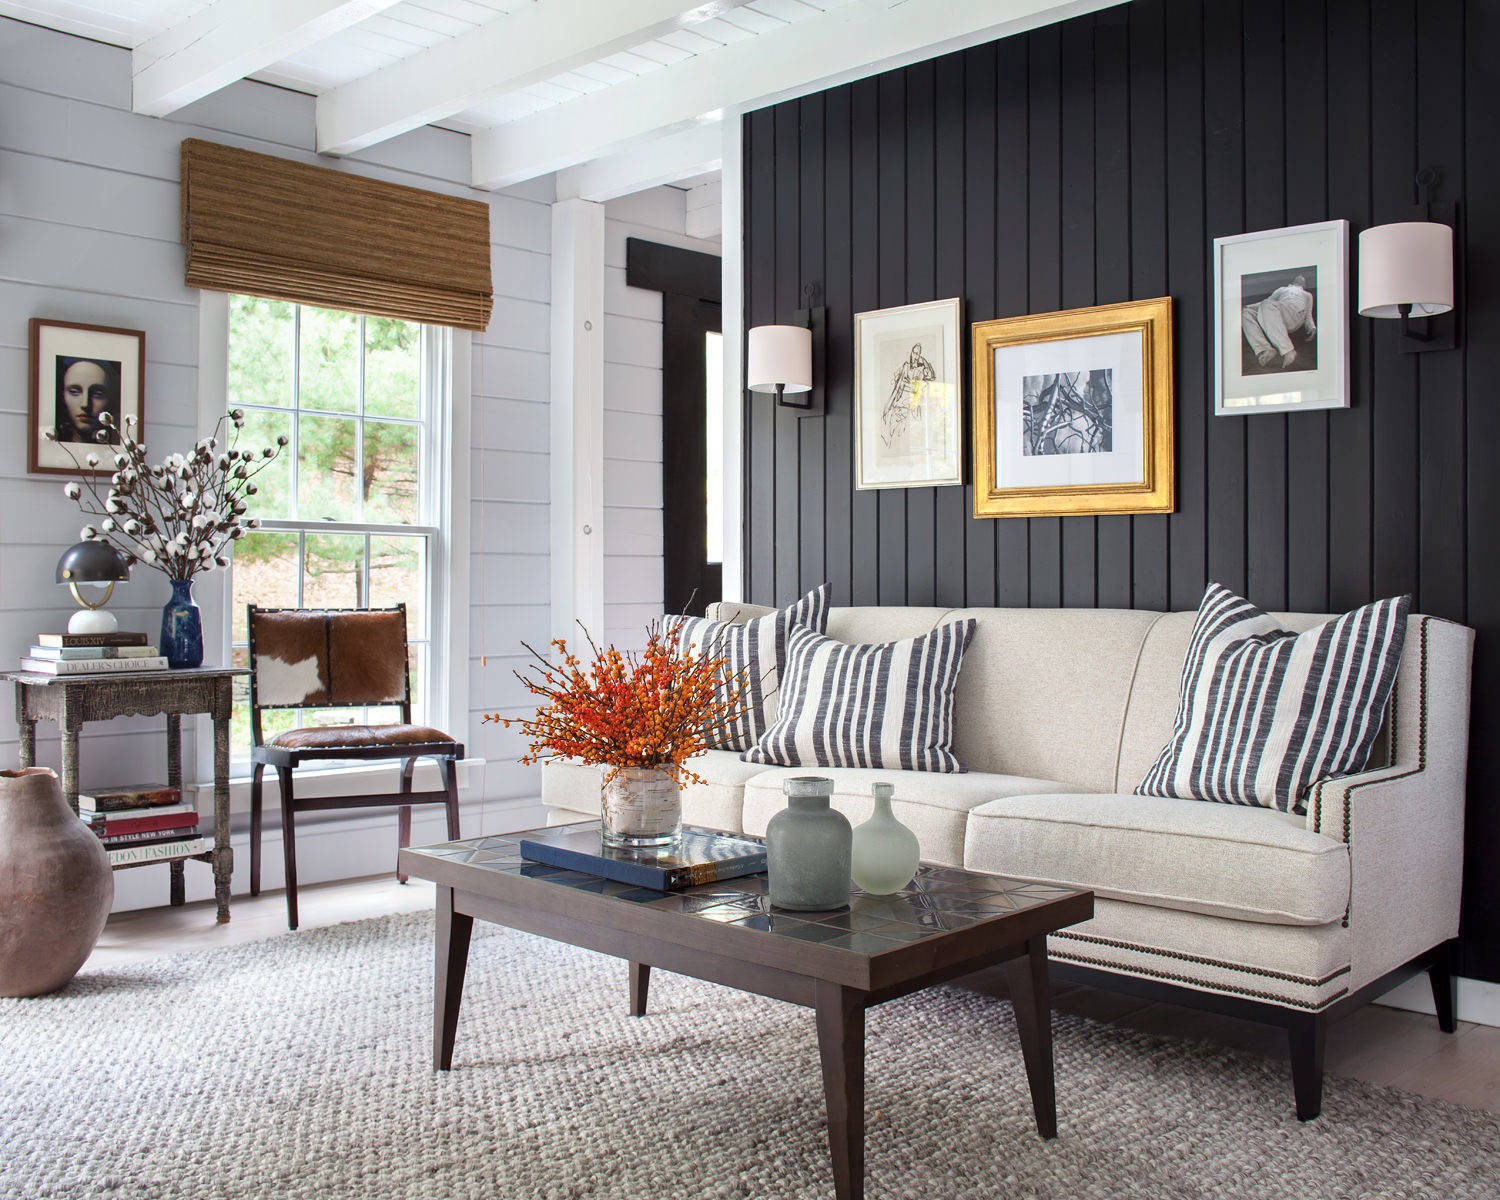 75 Beautiful Living Room With Black Walls Pictures Ideas April 2021 Houzz